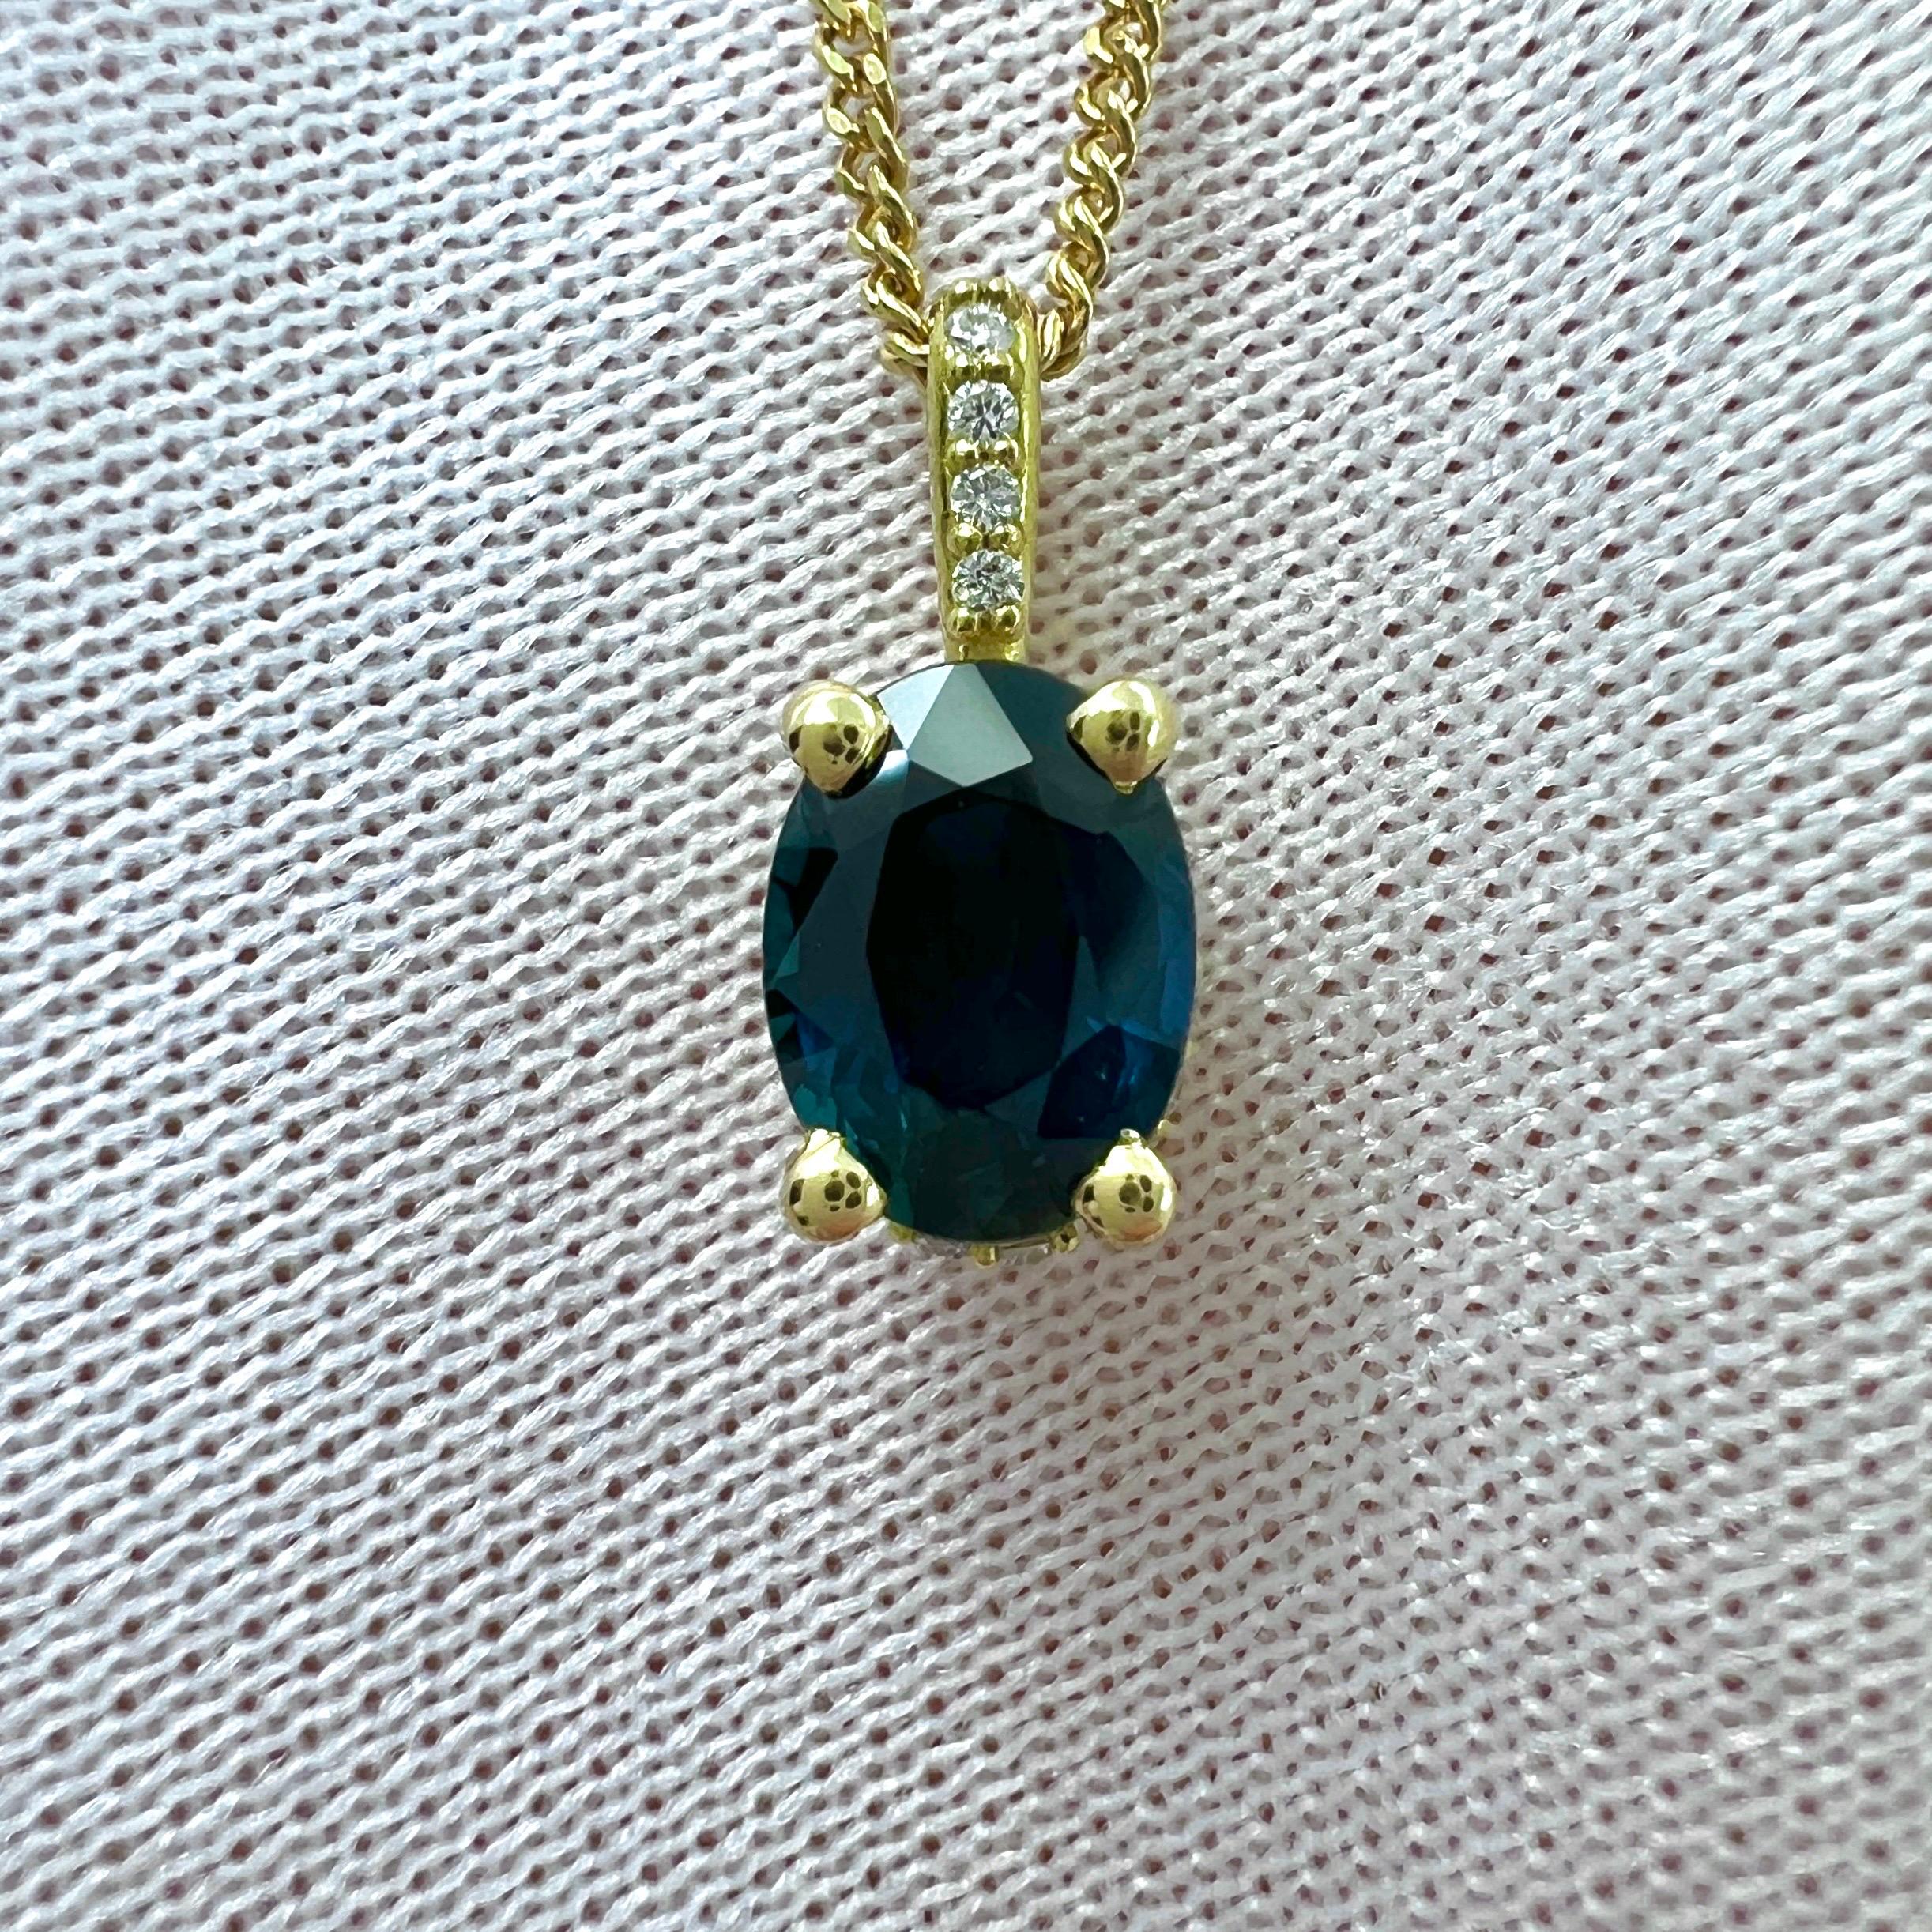 Natural Deep Blue Sapphire & Diamond 18k Yellow Gold Pendant Necklace.

1.00 Carat sapphire with a deep blue colour and excellent clarity. A very clean stone, VVS. Also has an excellent oval cut. Measures 7x5mm.

The sapphire is set in a stunning